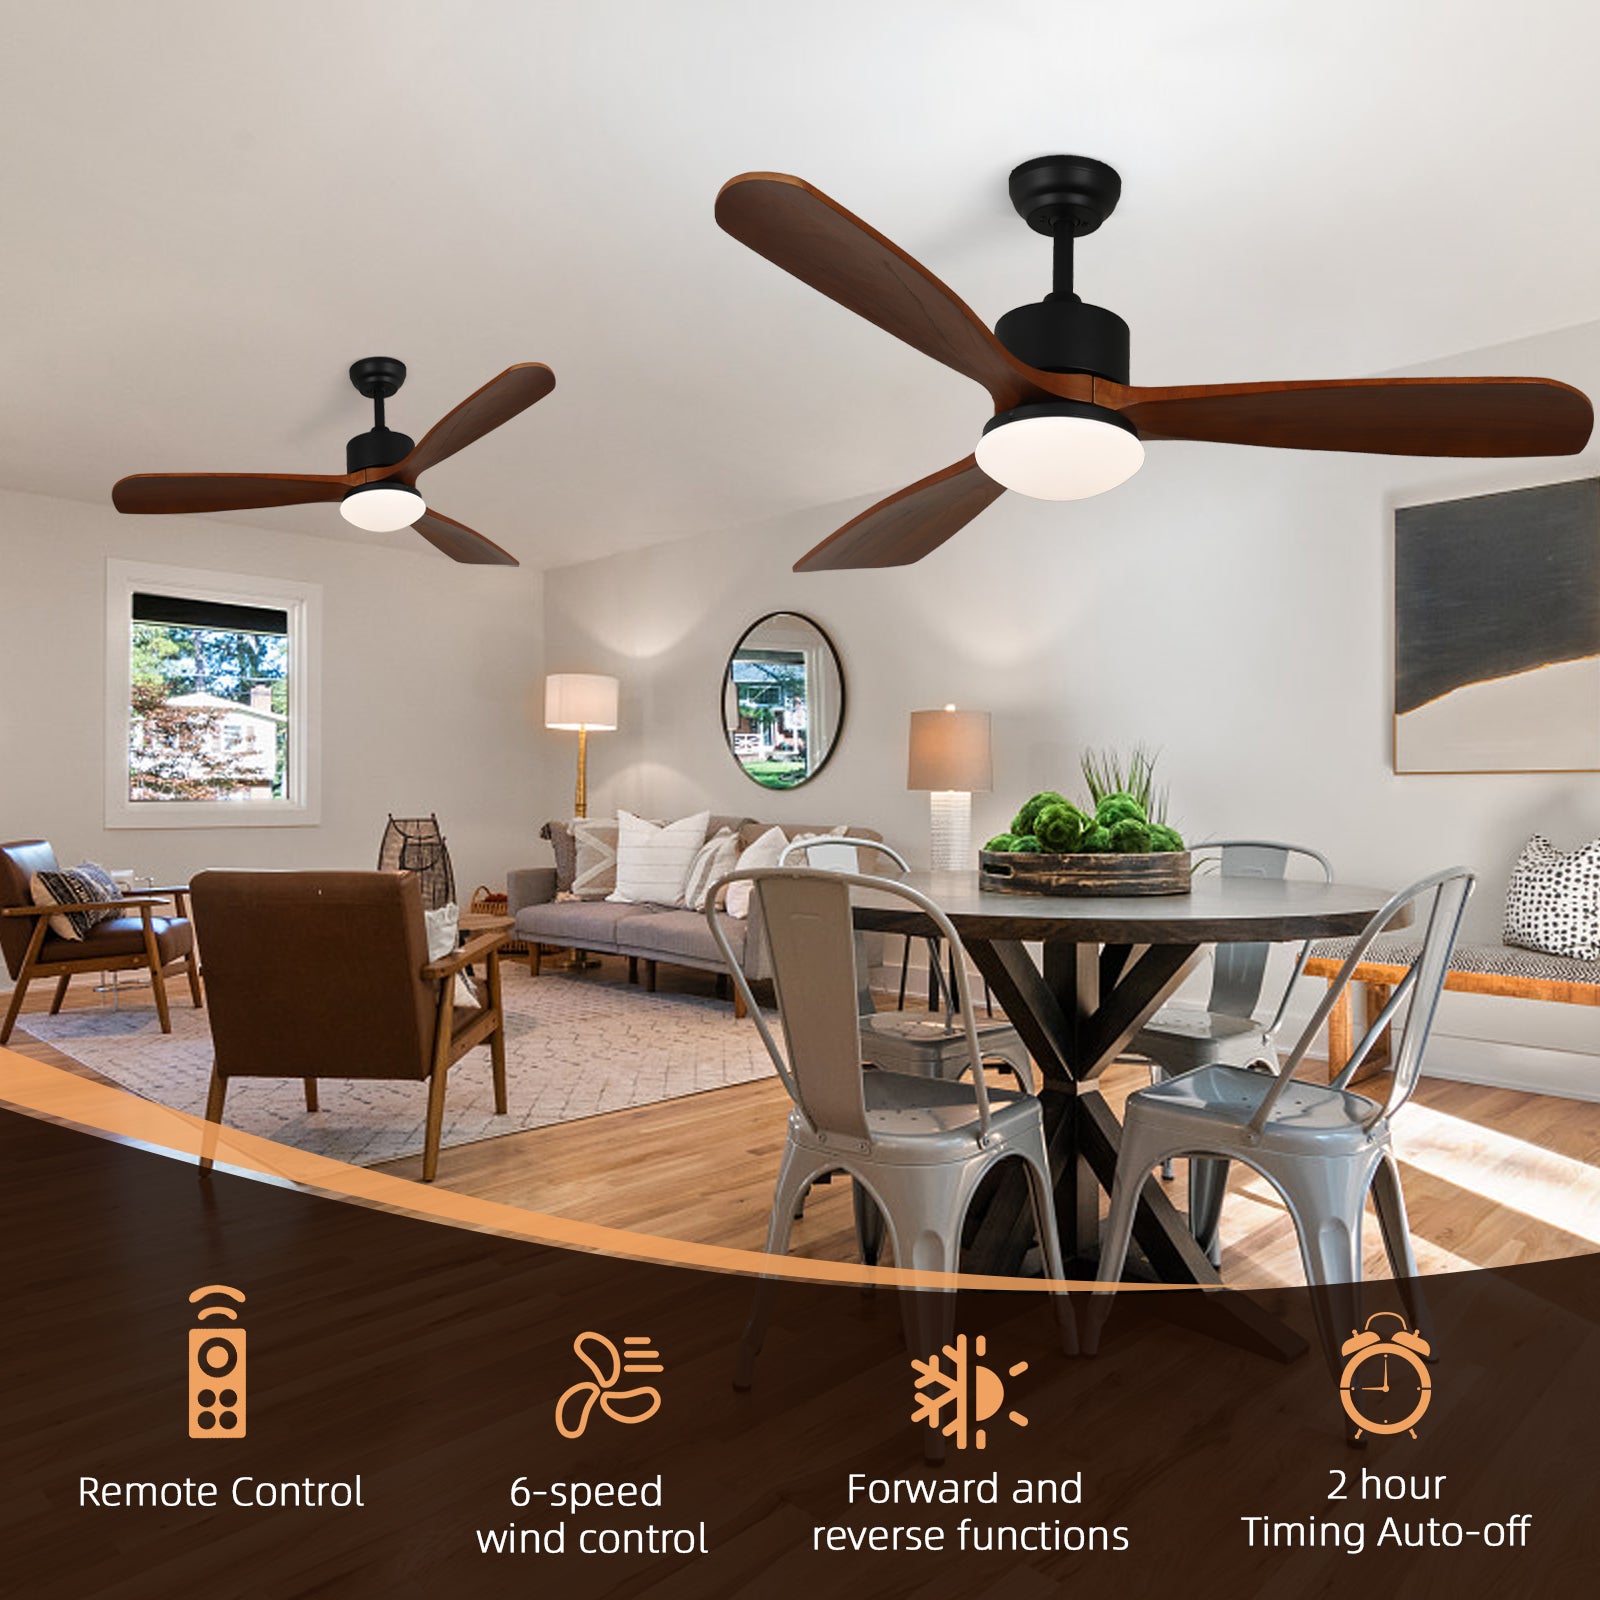 REYDELUZ 52" Ceiling Fan with Lights Remote Control Outdoor Wood Ceiling Fans Noiseless Reversible DC Motor